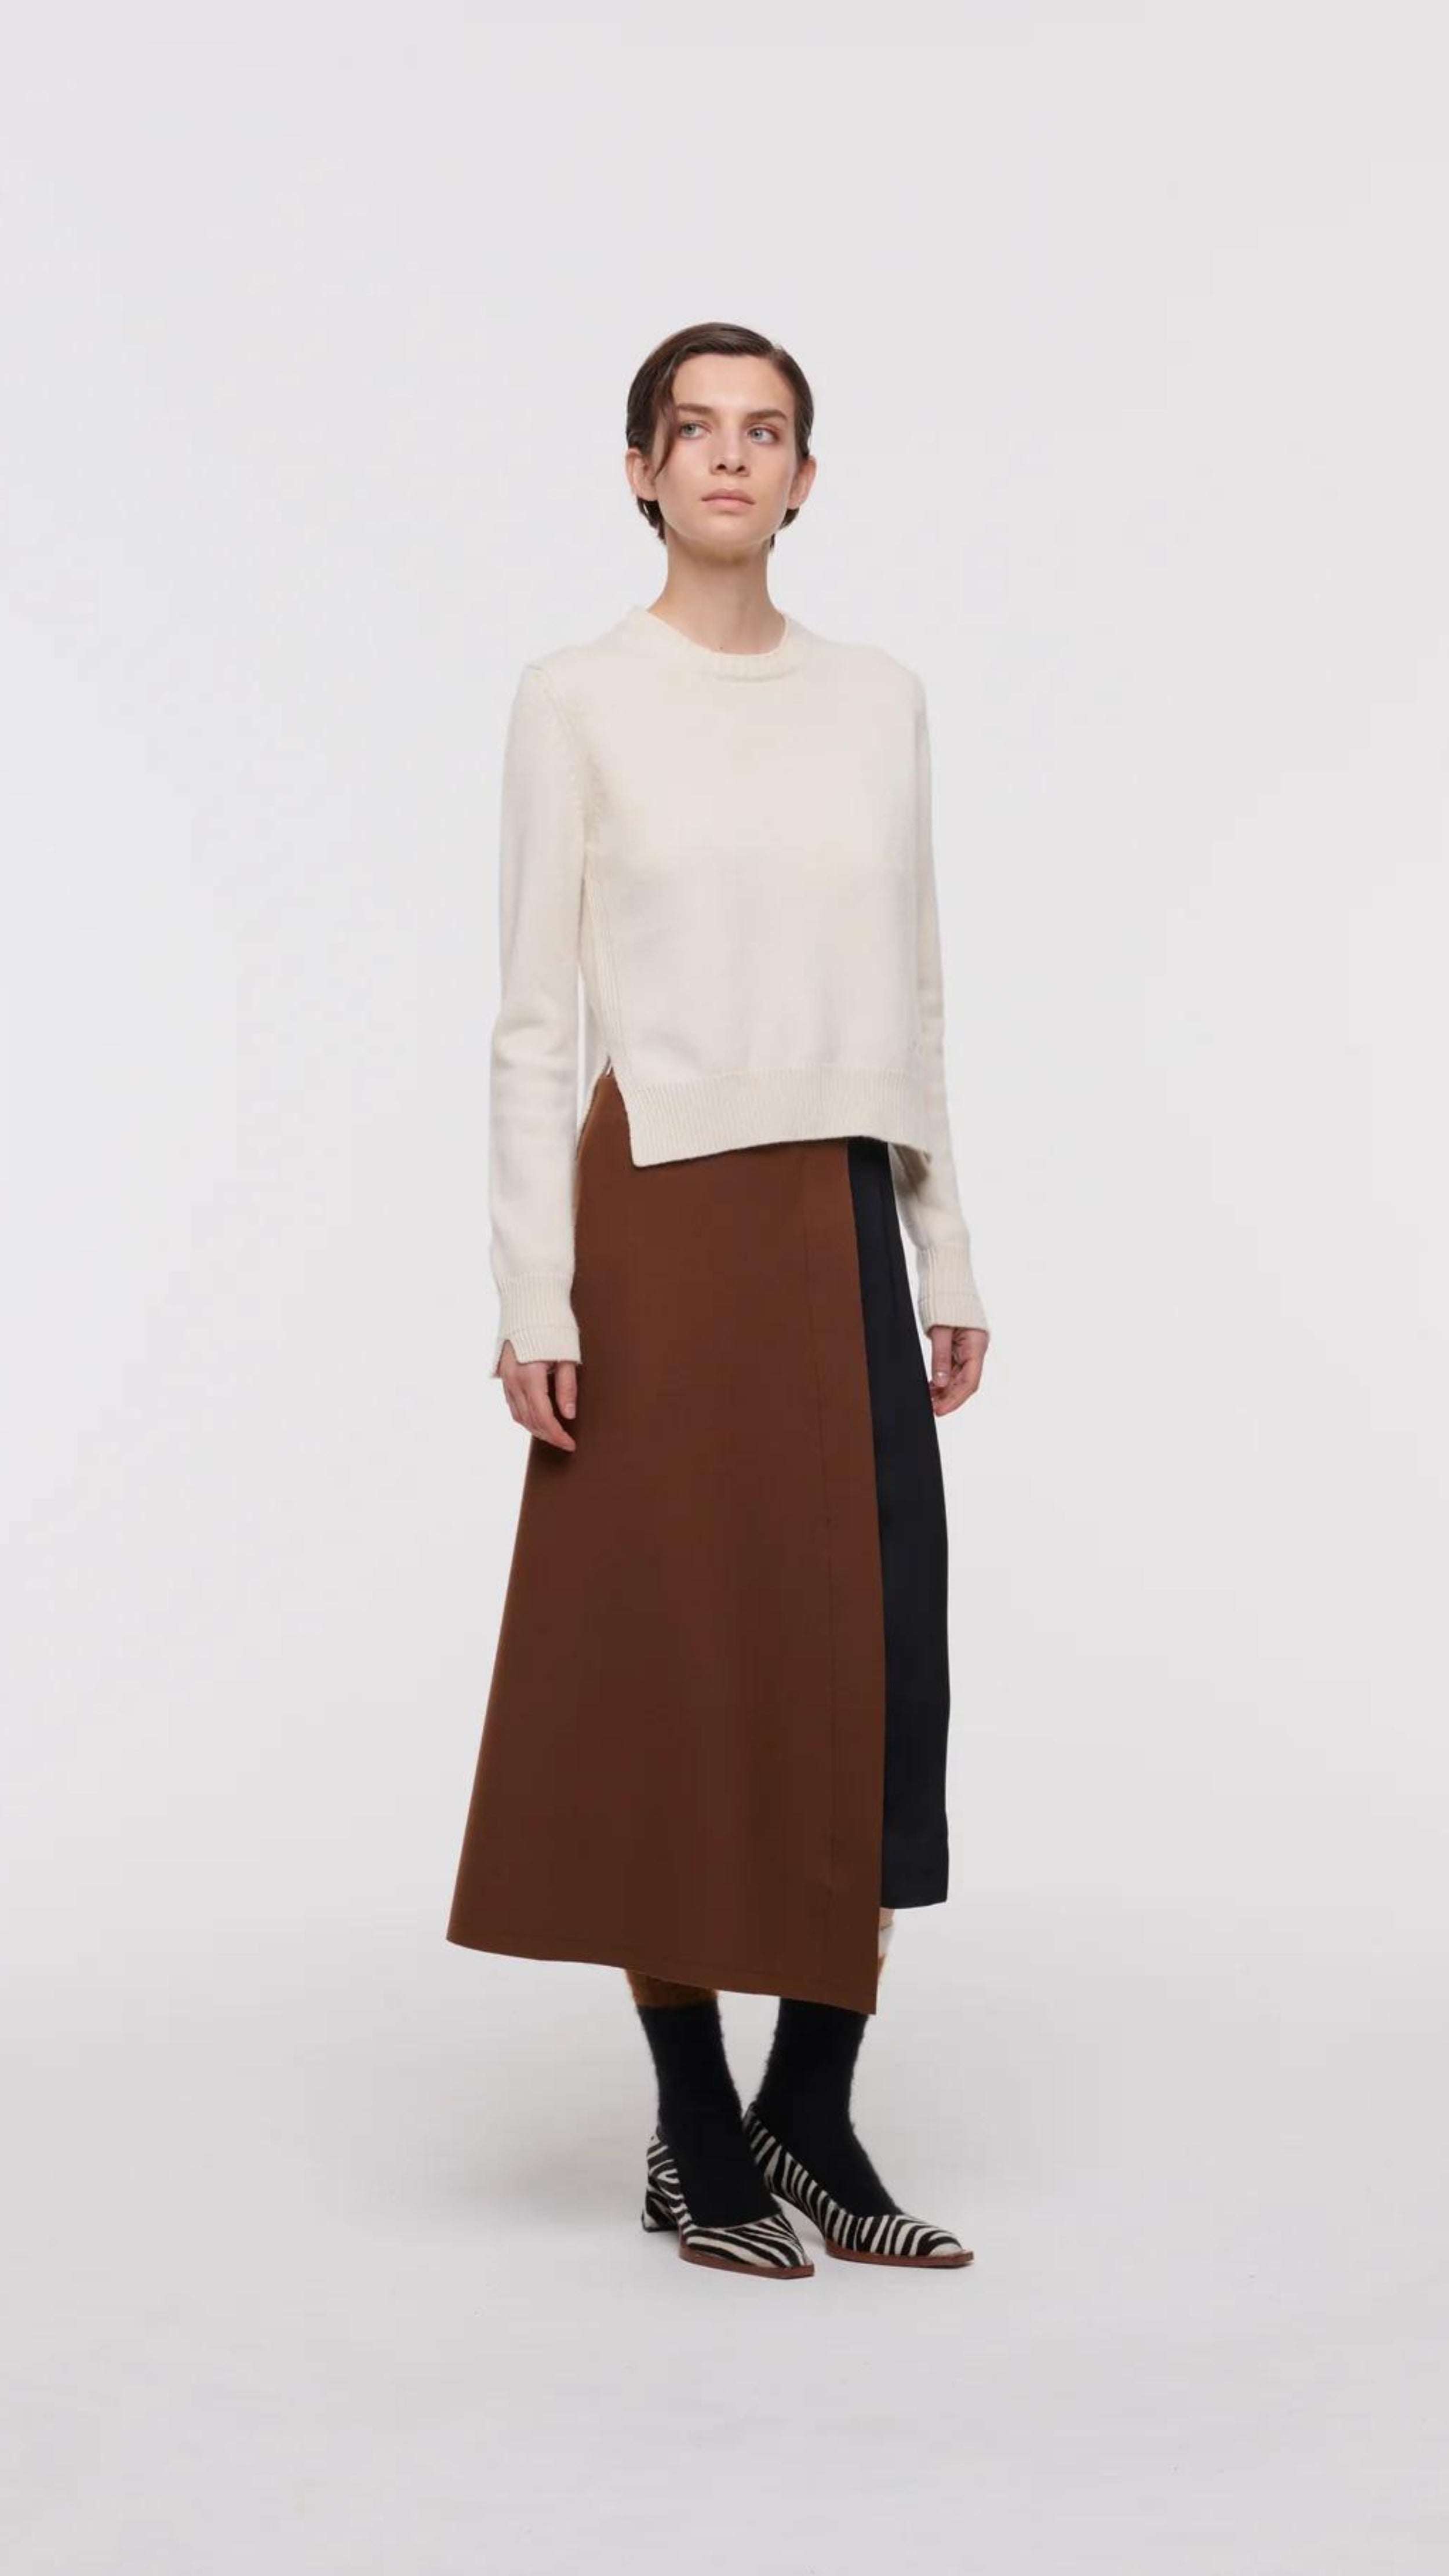 Plac C Contrast Midi Skirt. Paneled midi skirt in sofy brown chestnut wool and black satin. Modern and classic in shape and colors. Shown here on the model facing front.